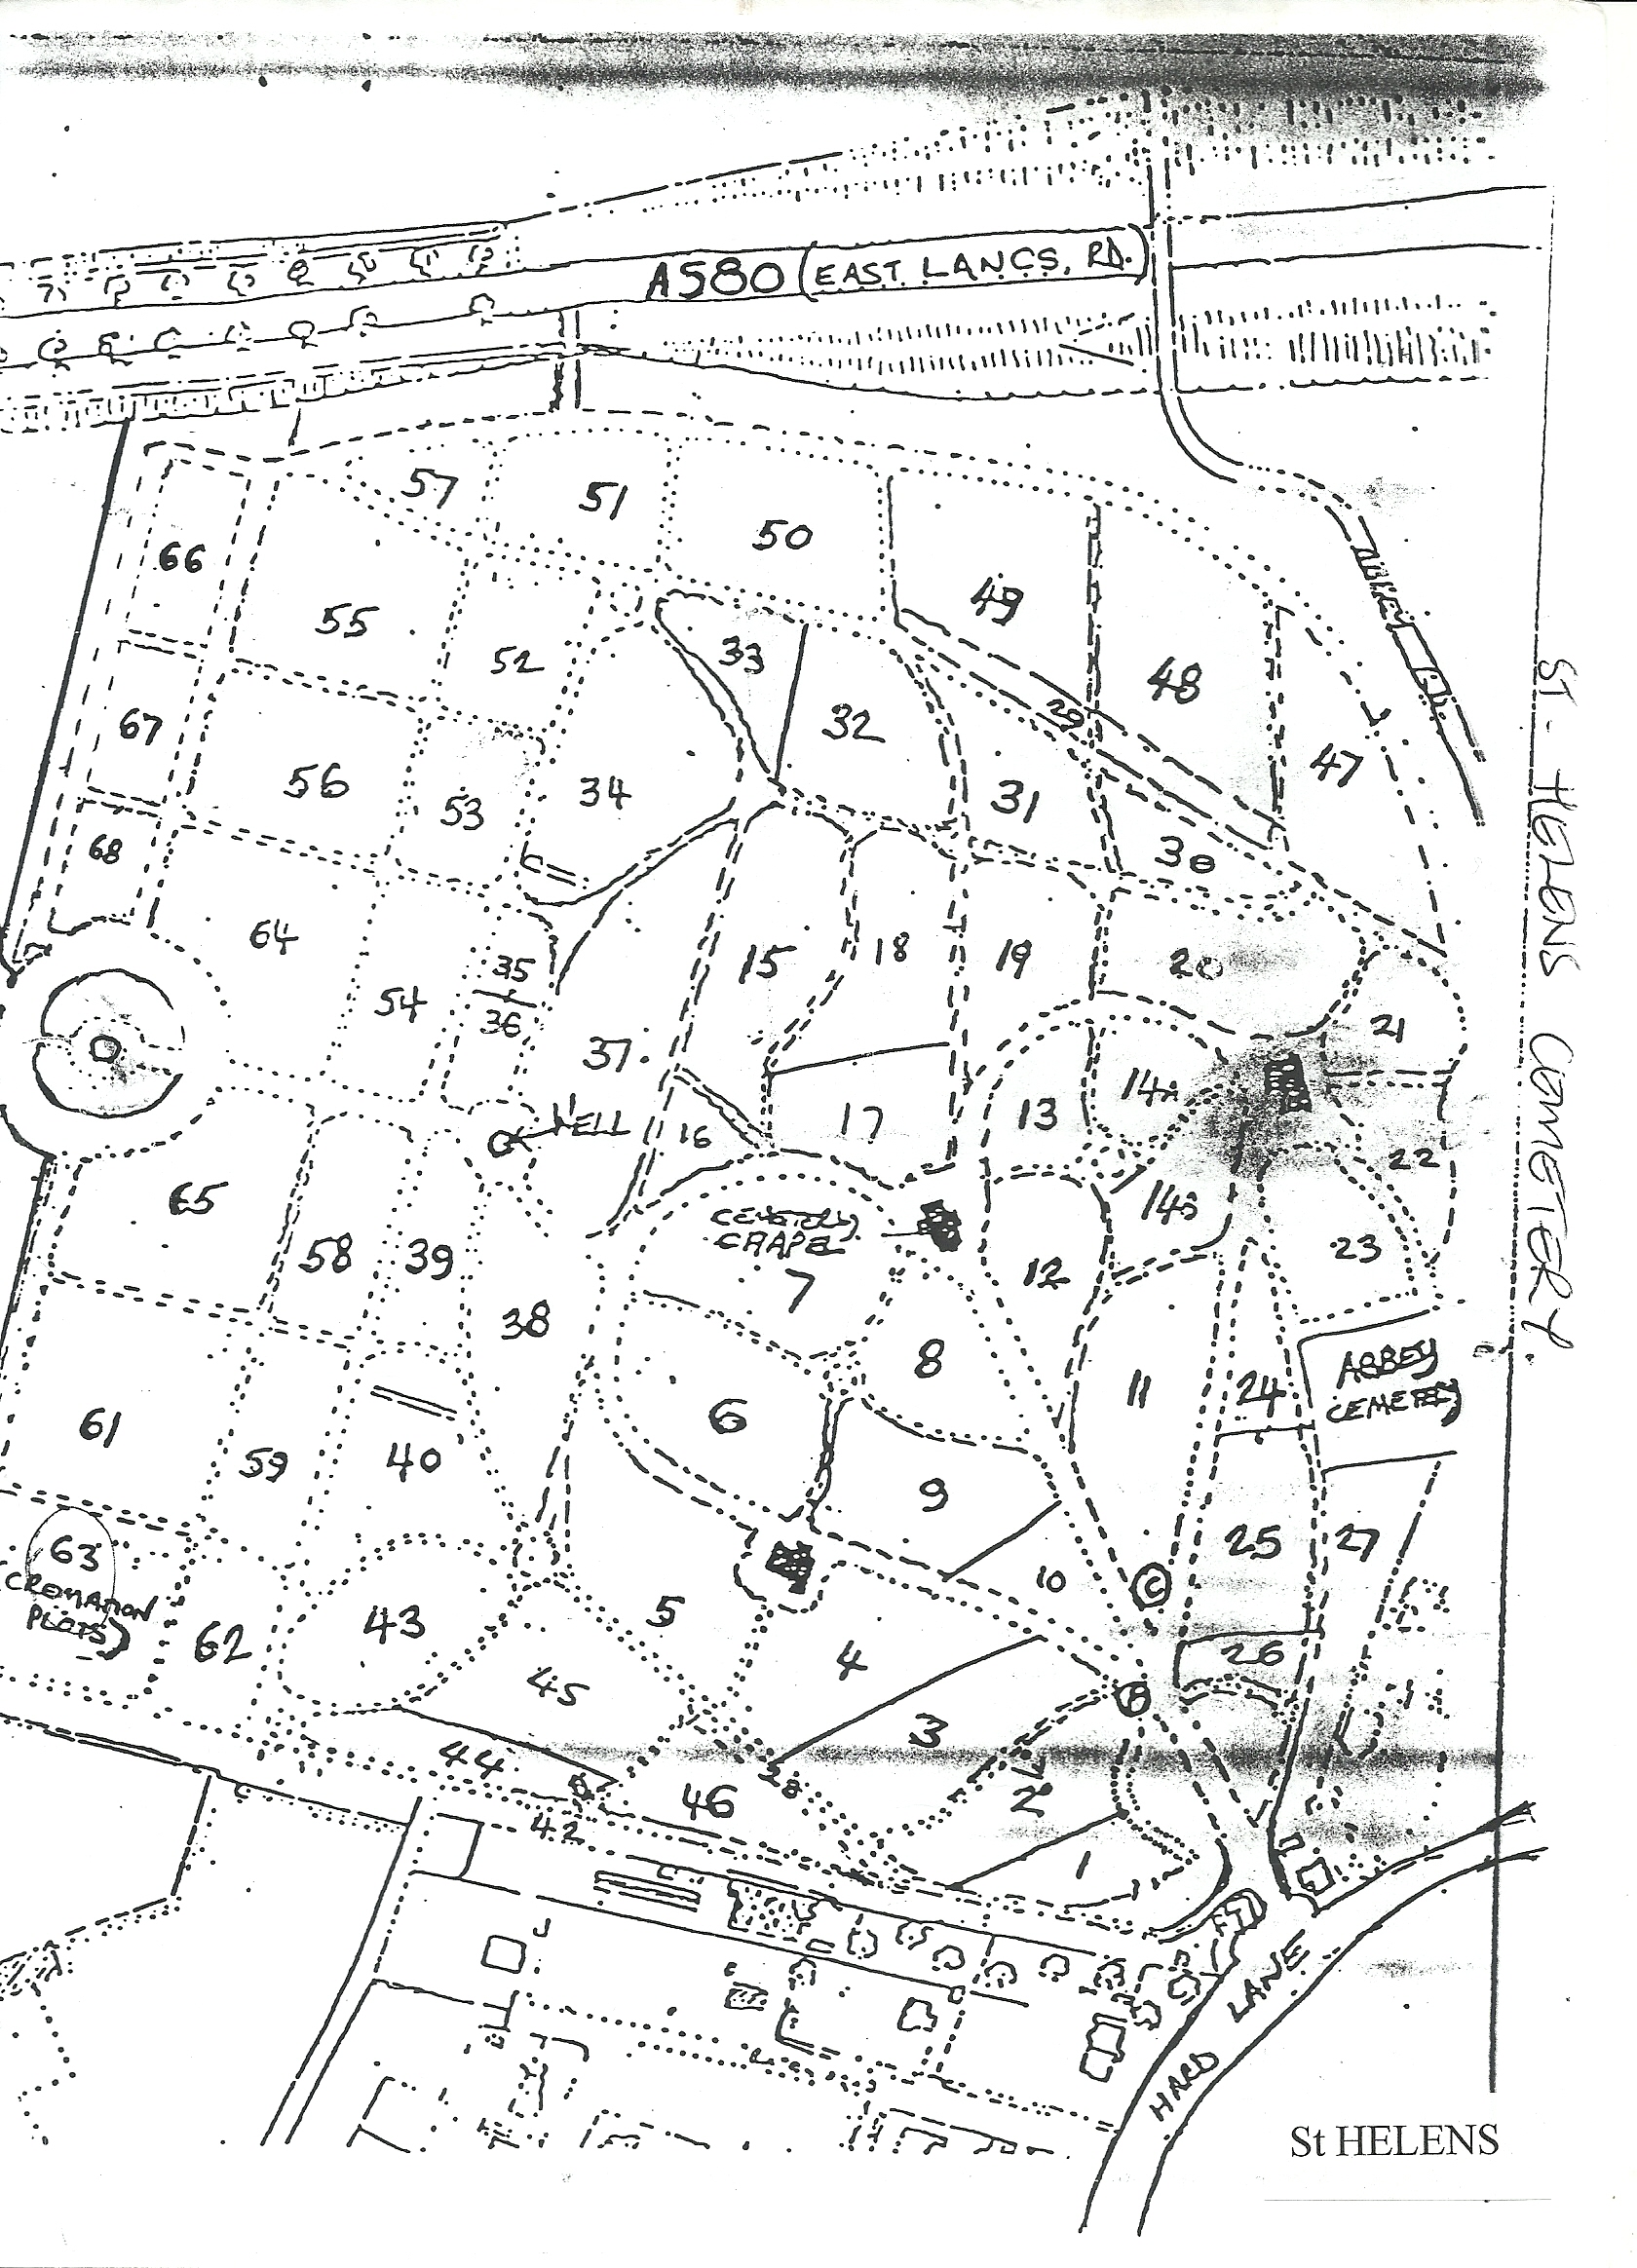 Ford cemetery liverpool map